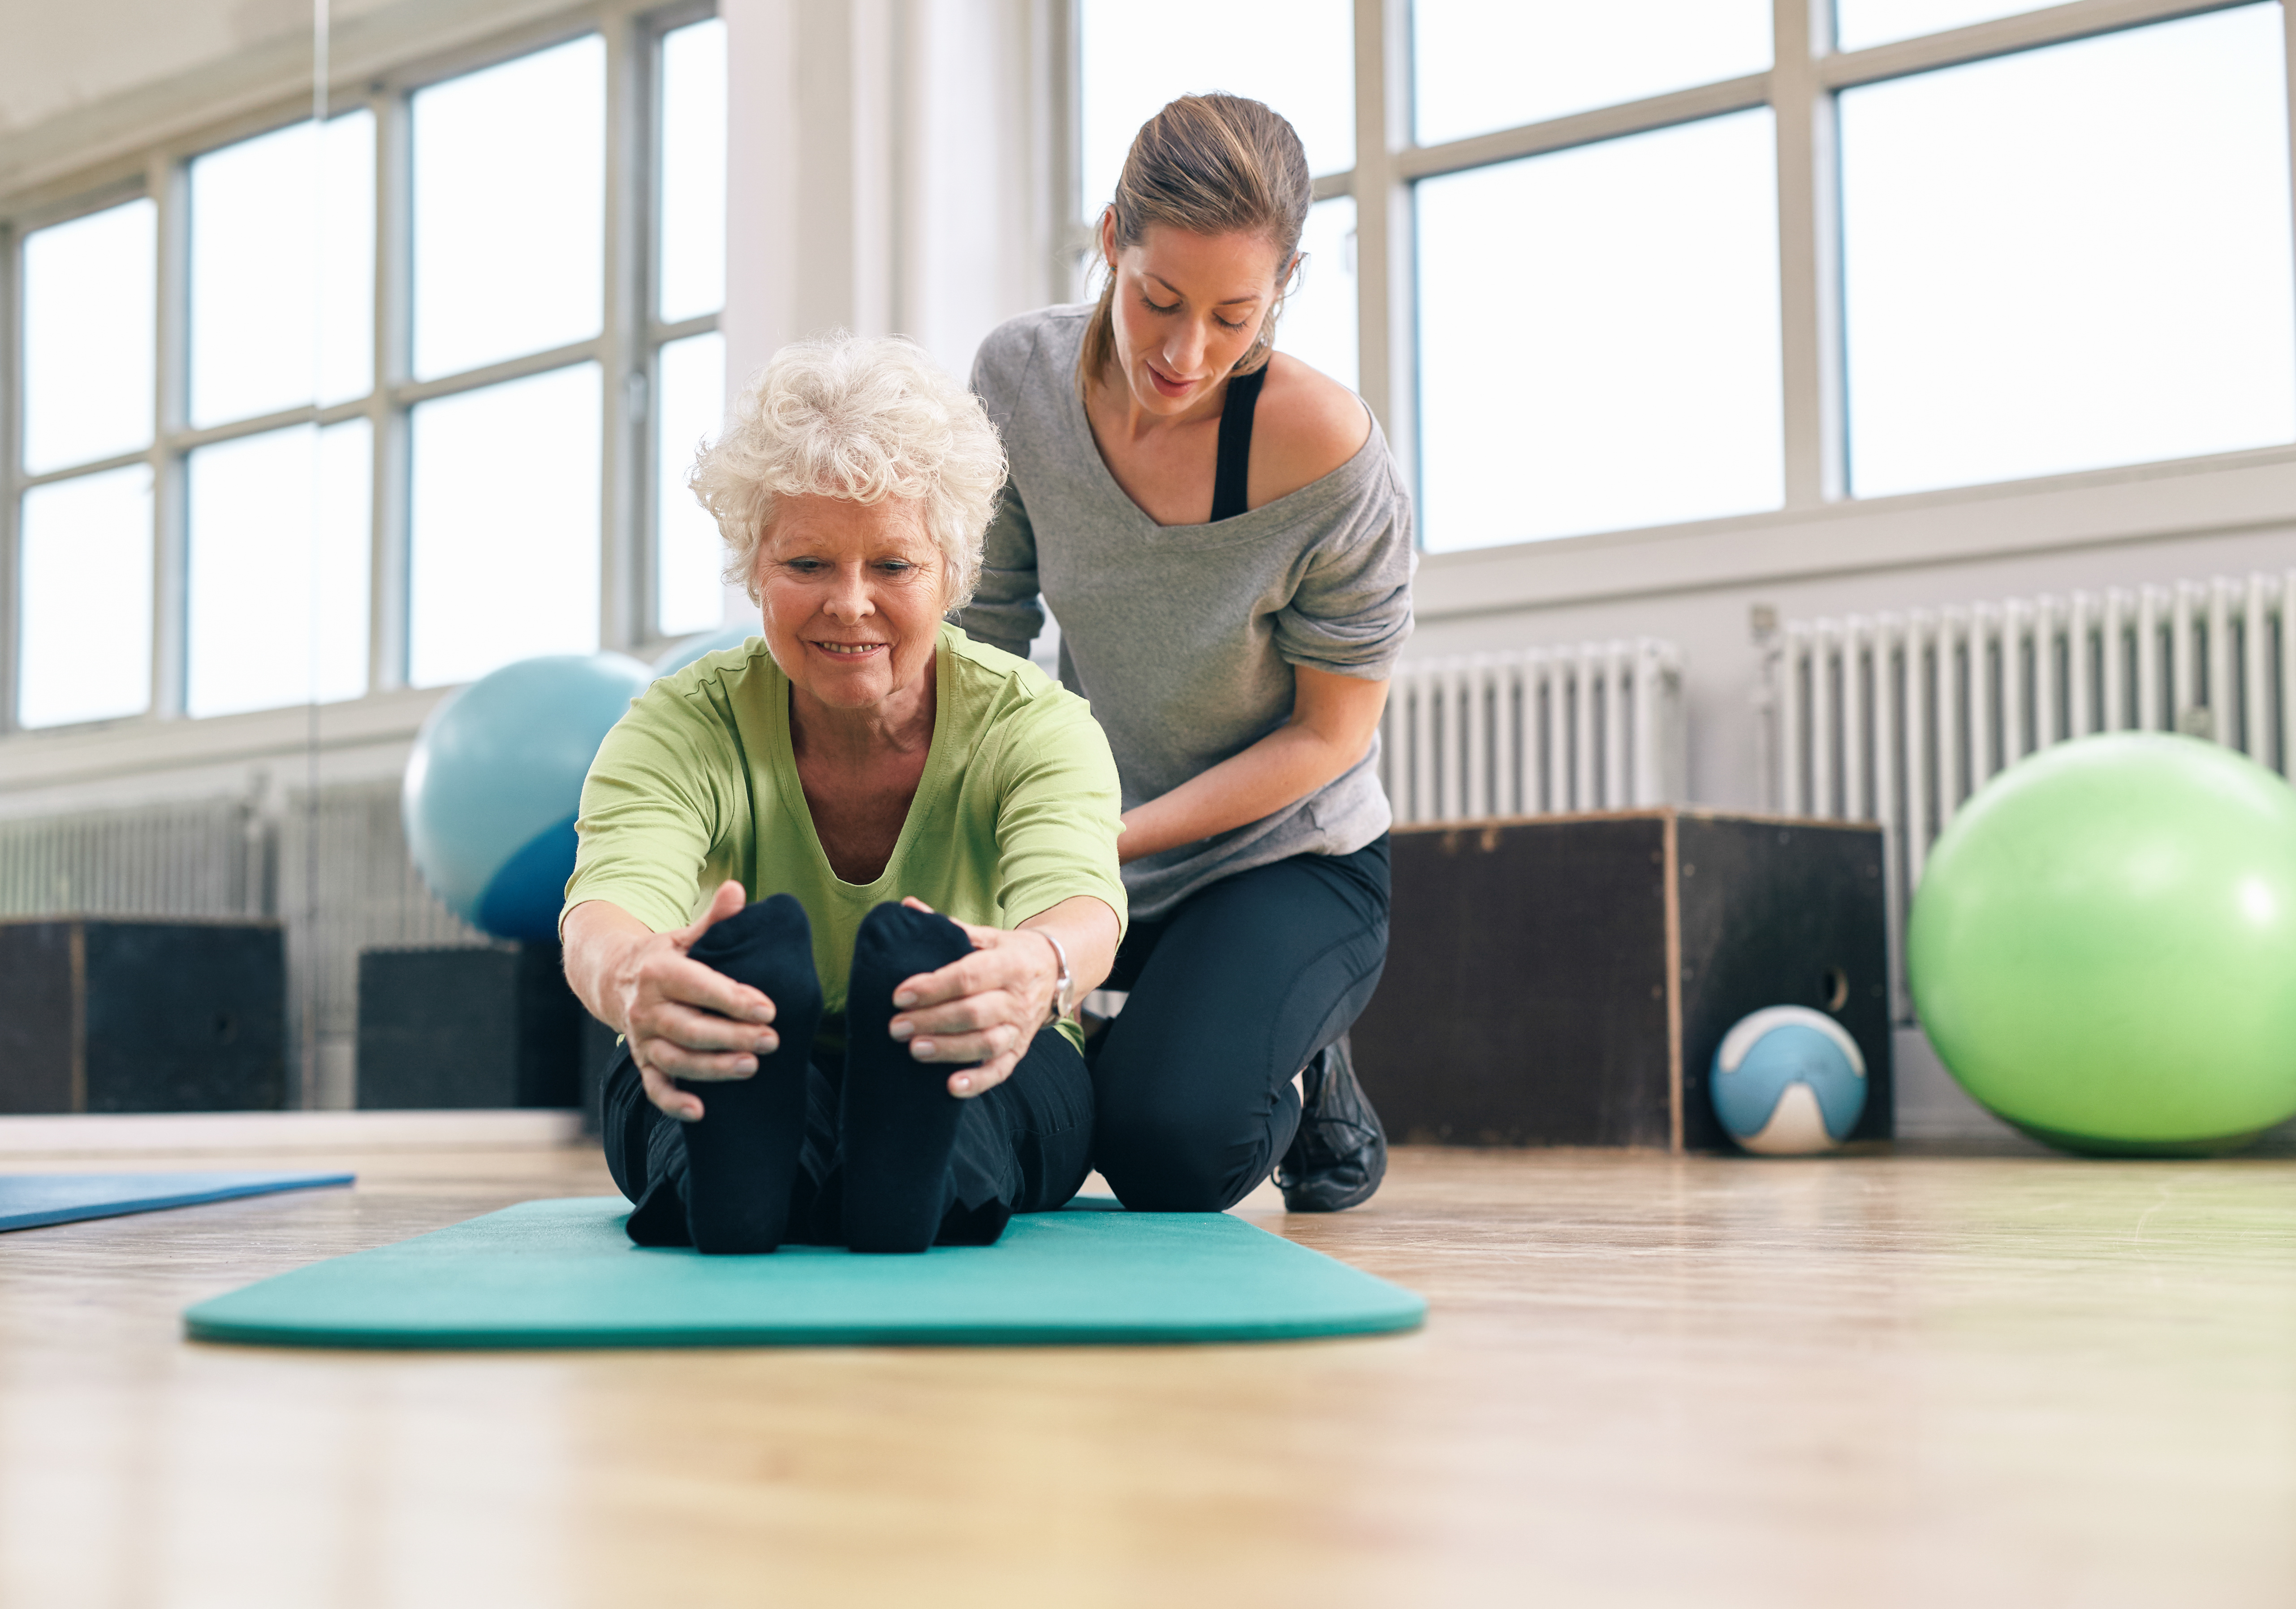 Elderly woman being helped by her instructor in the gym for exercising. Senior woman sitting on fitness mat bending forward and touching her toes with her personal trainer assisting.